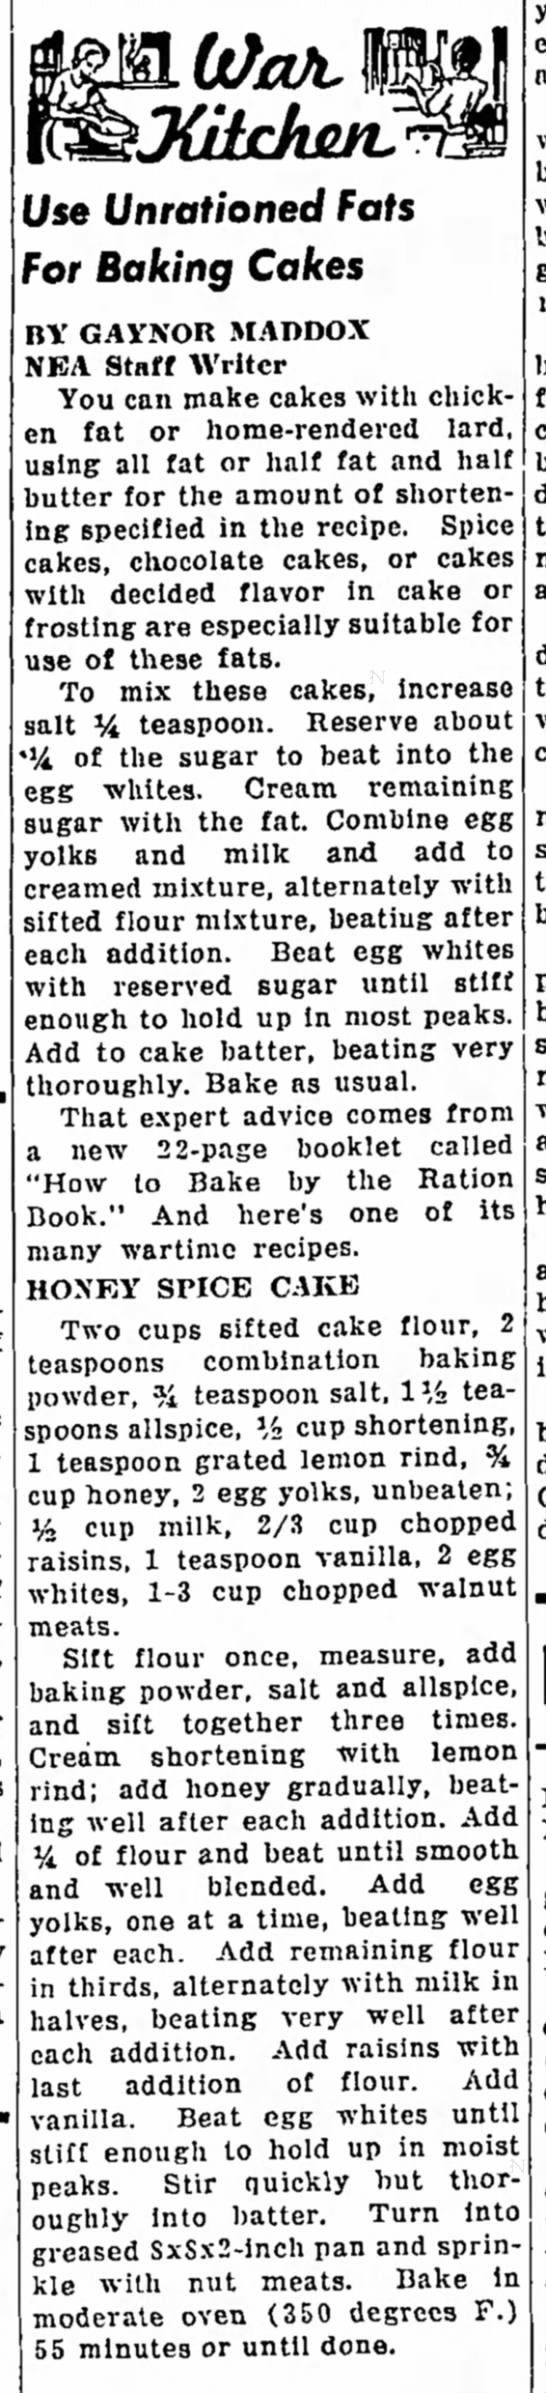 How to bake with unrationed fats instead of butter; honey spice cake recipe (1943) - 